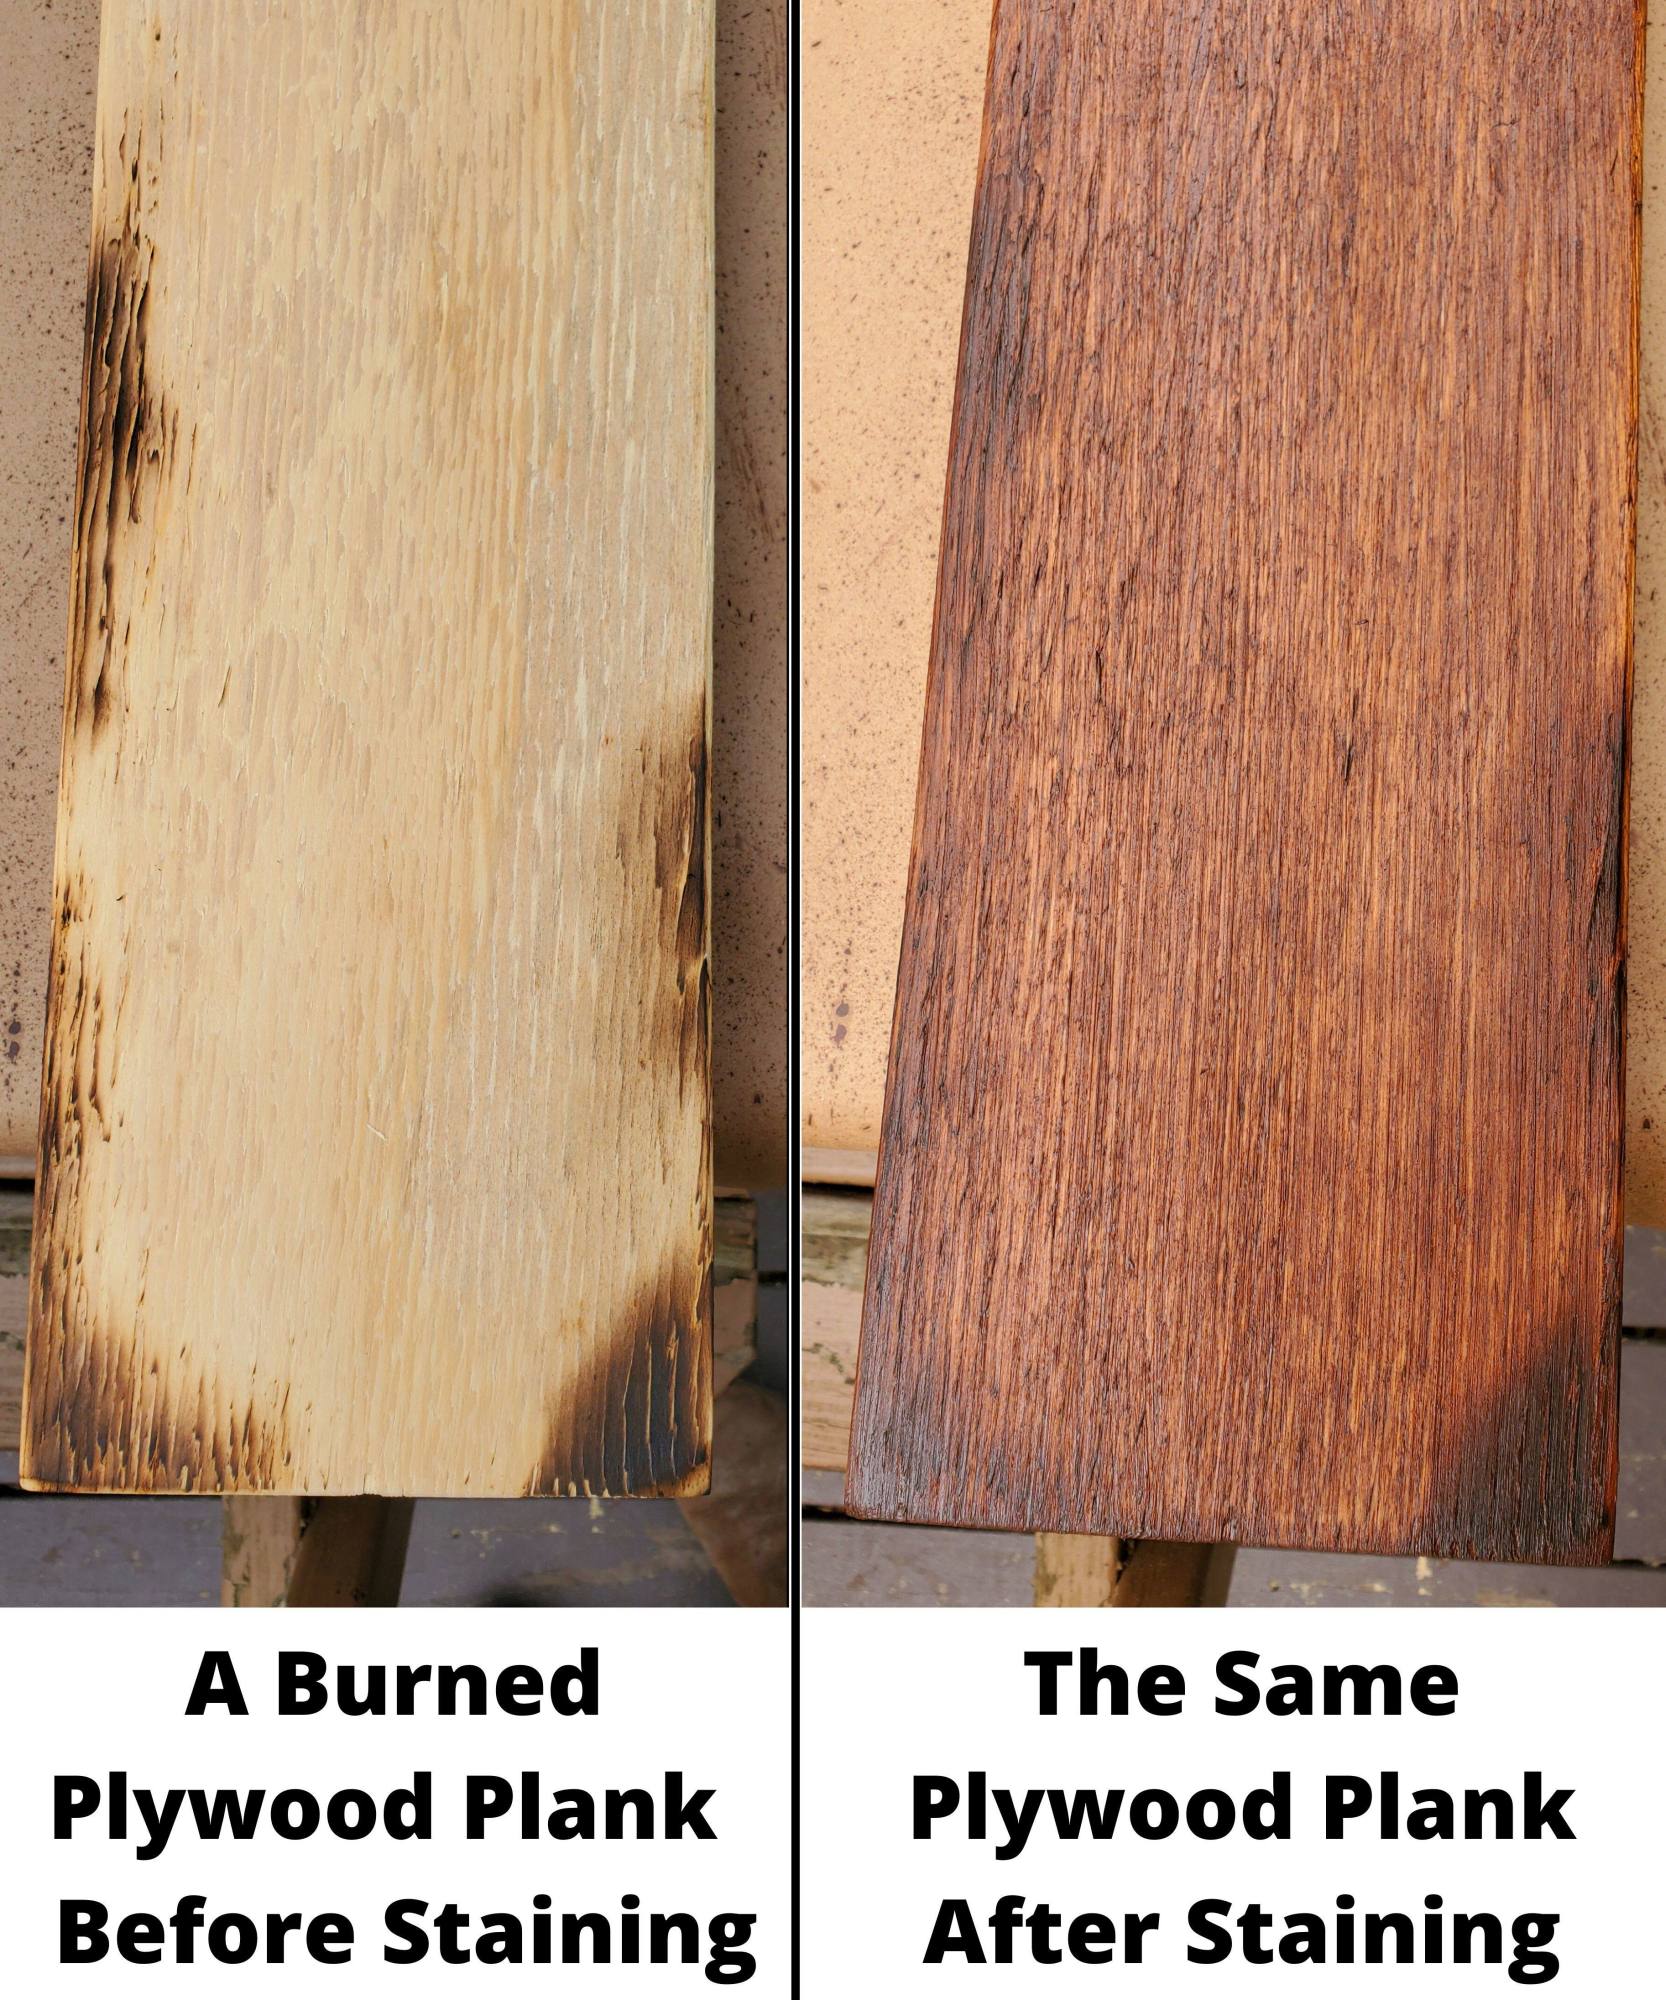 DIY Wide Plank Plywood Flooring - .a Burned Plywood Plank Before And After Staining